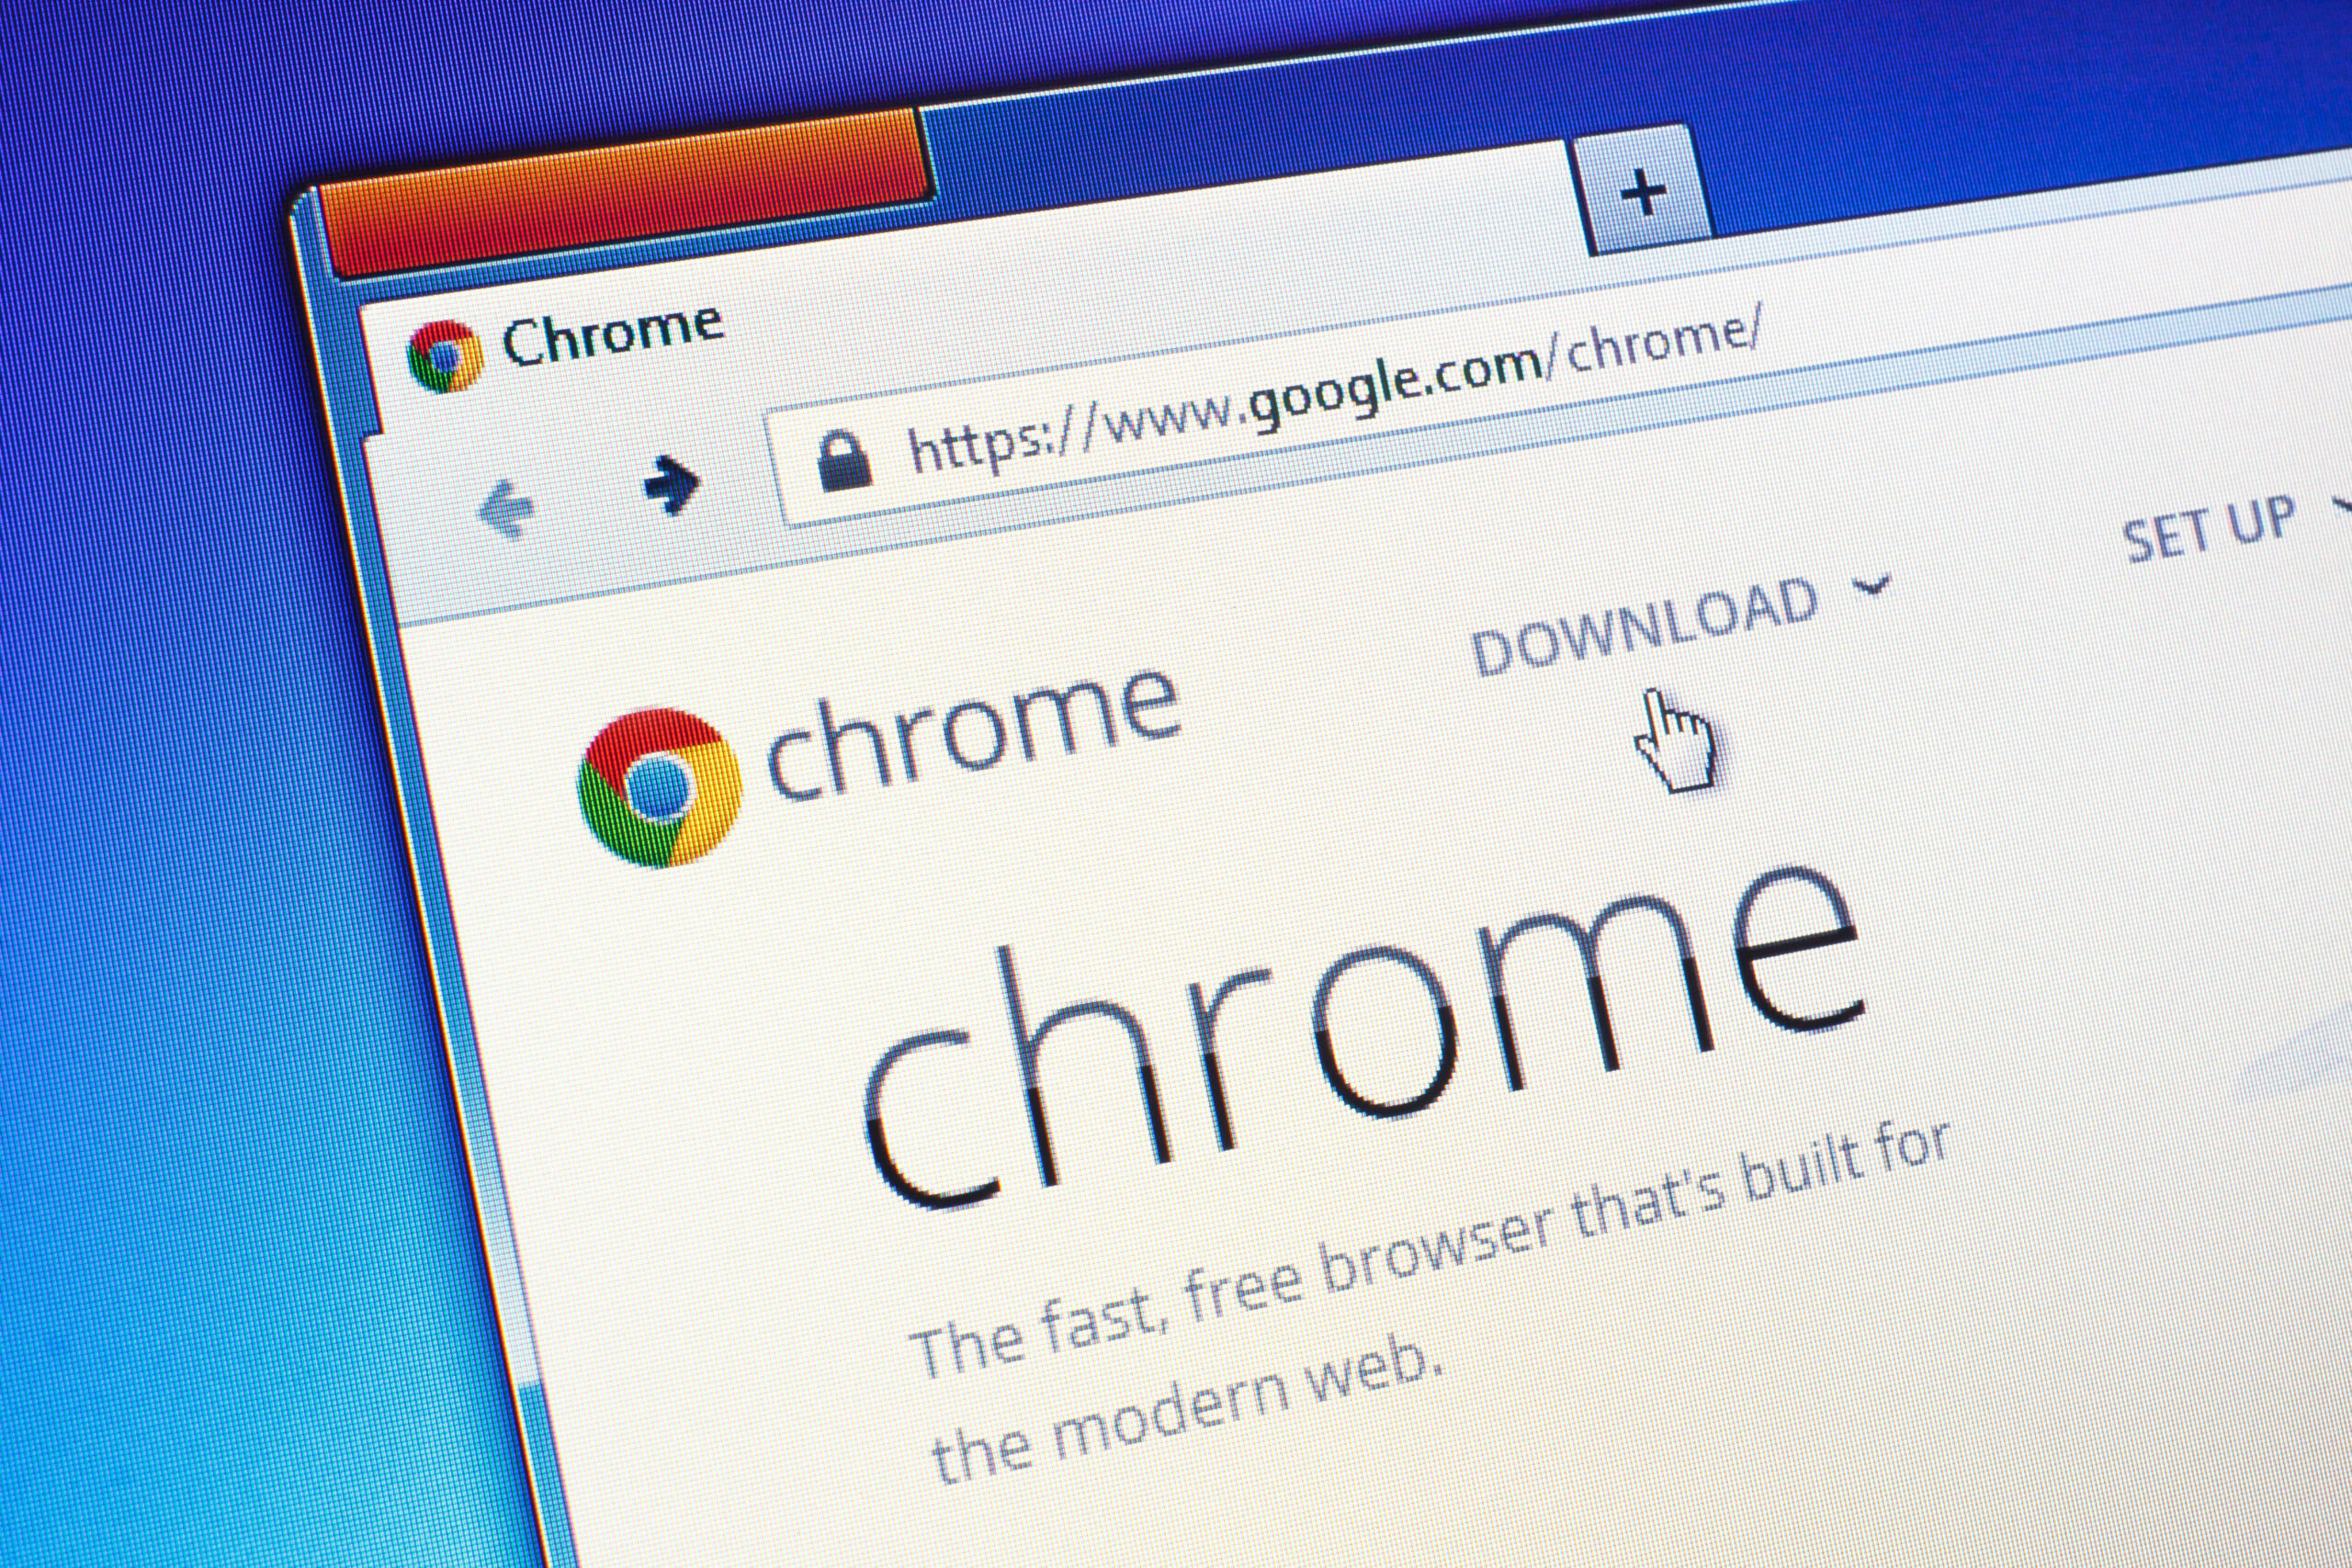 Google’s Souped-up Chrome Store Review Process Foiled by Data-Stealer – Source: www.darkreading.com